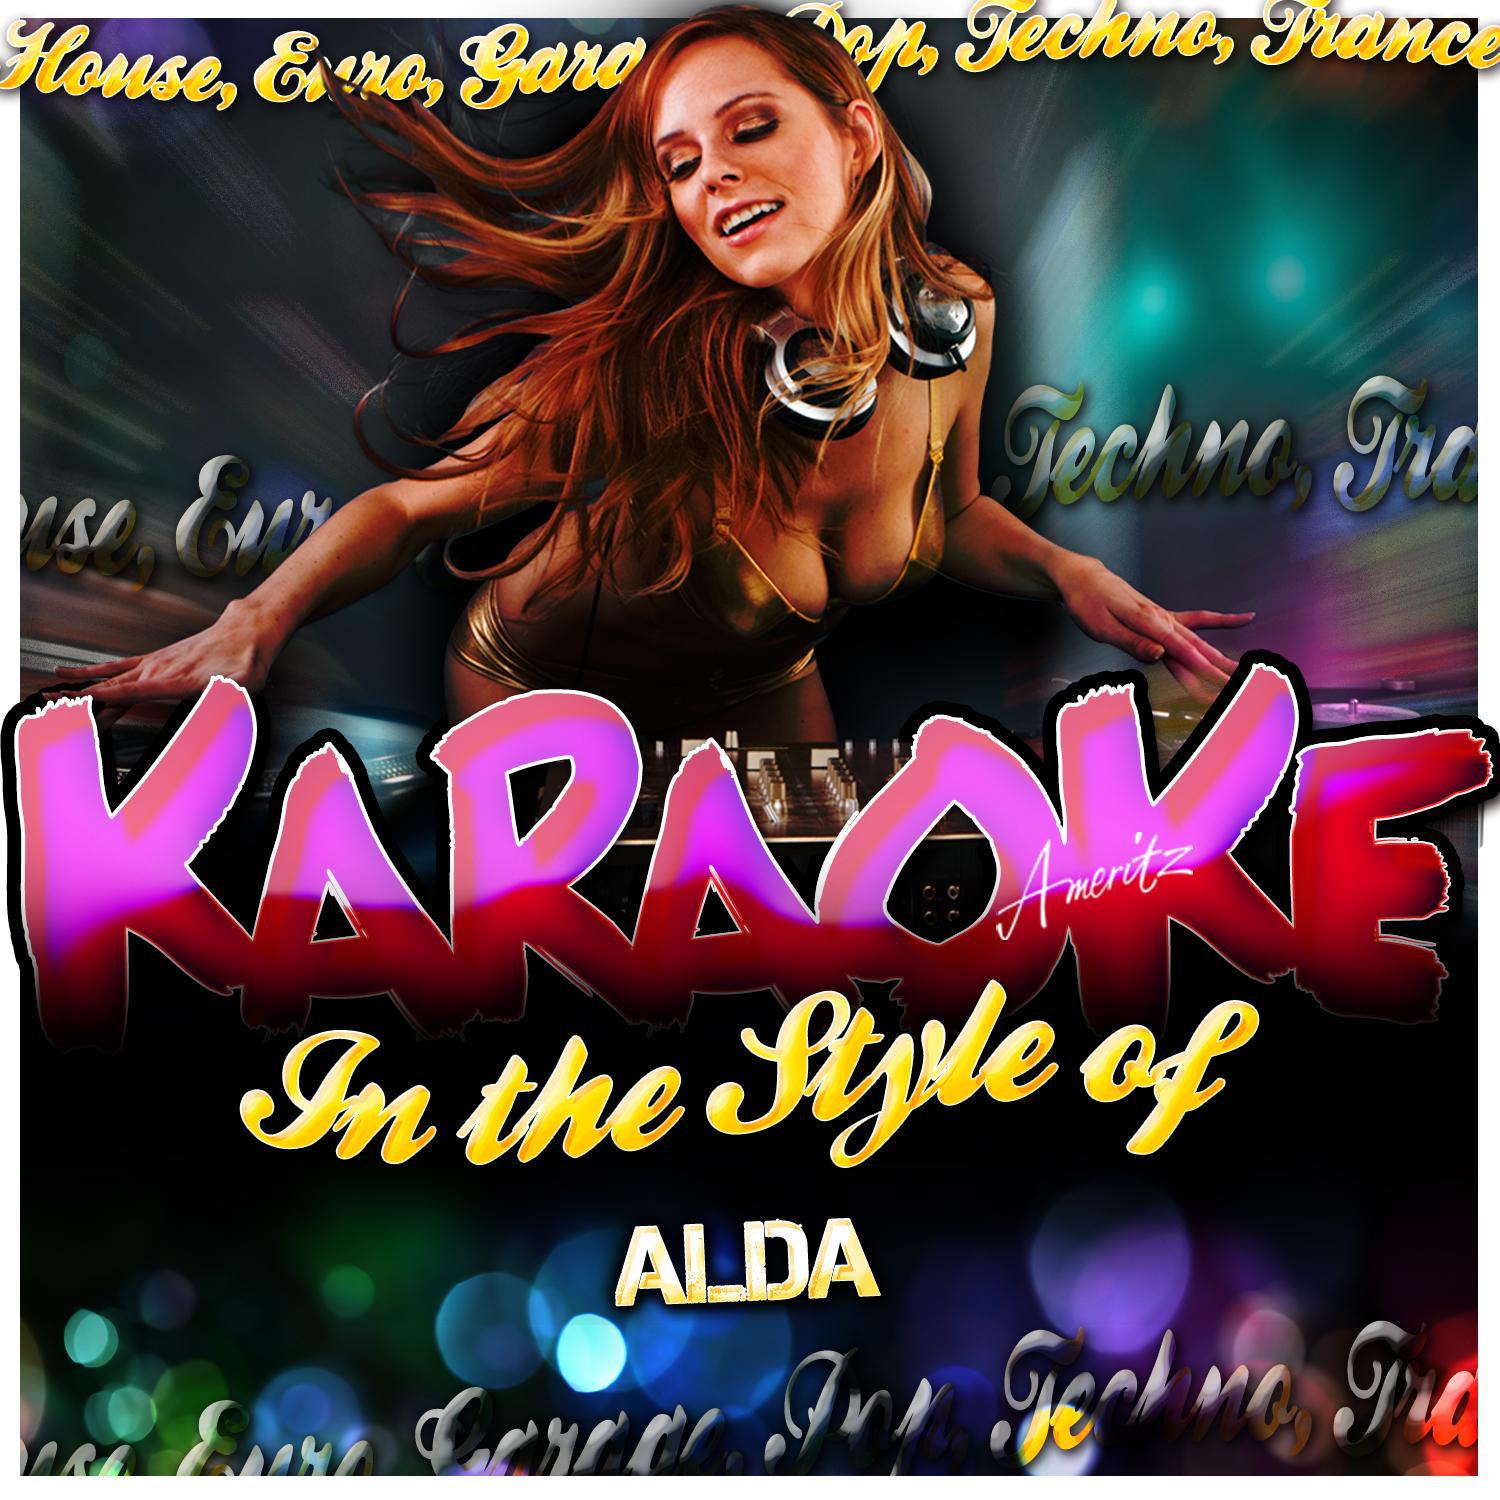 Real Good Time (In the Style of Alda) [Karaoke Version]